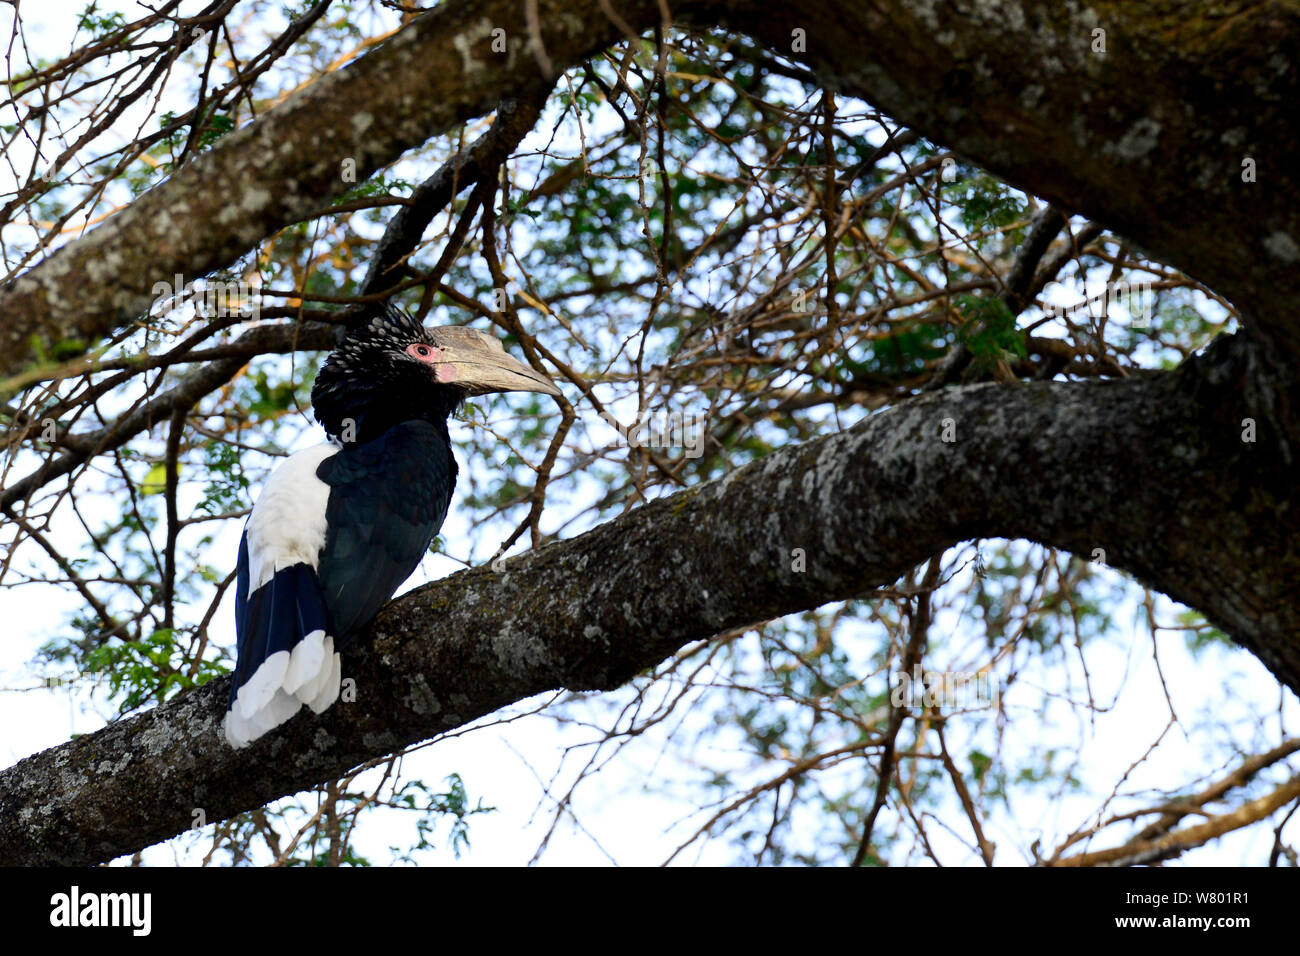 White-thighed hornbill (Ceratogymna cylindricus) perched on tree, Lake Awassa, Rift Valley. Ethiopia, November 2014 Stock Photo